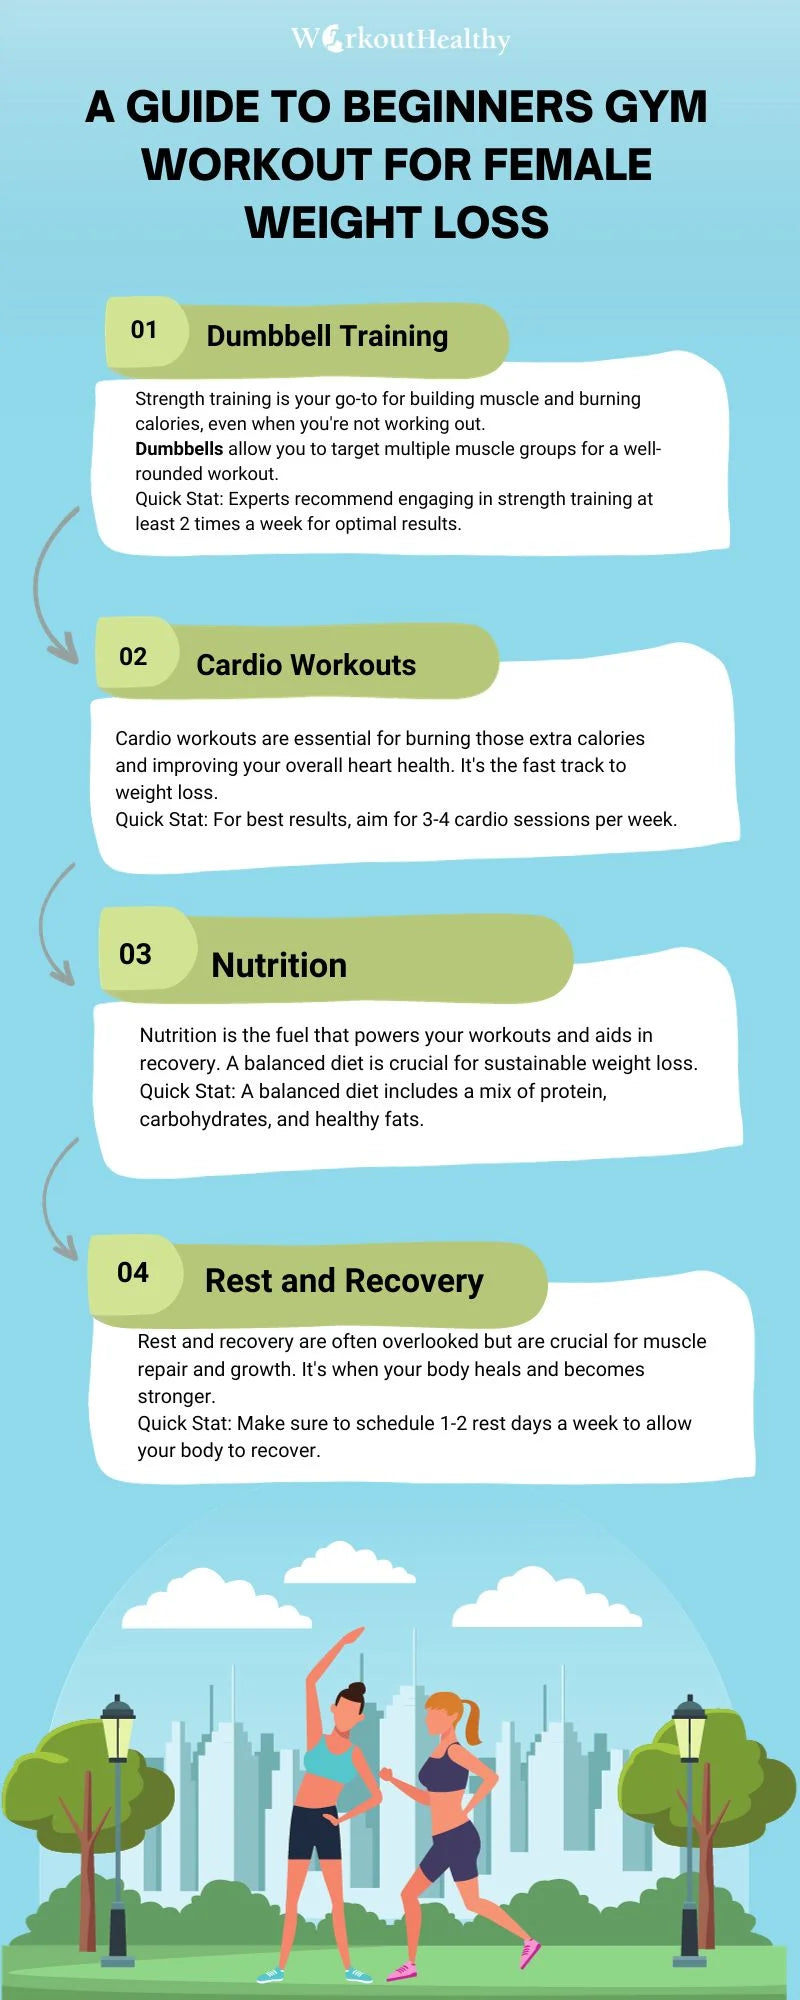 infographic on weightloss for women in the gym